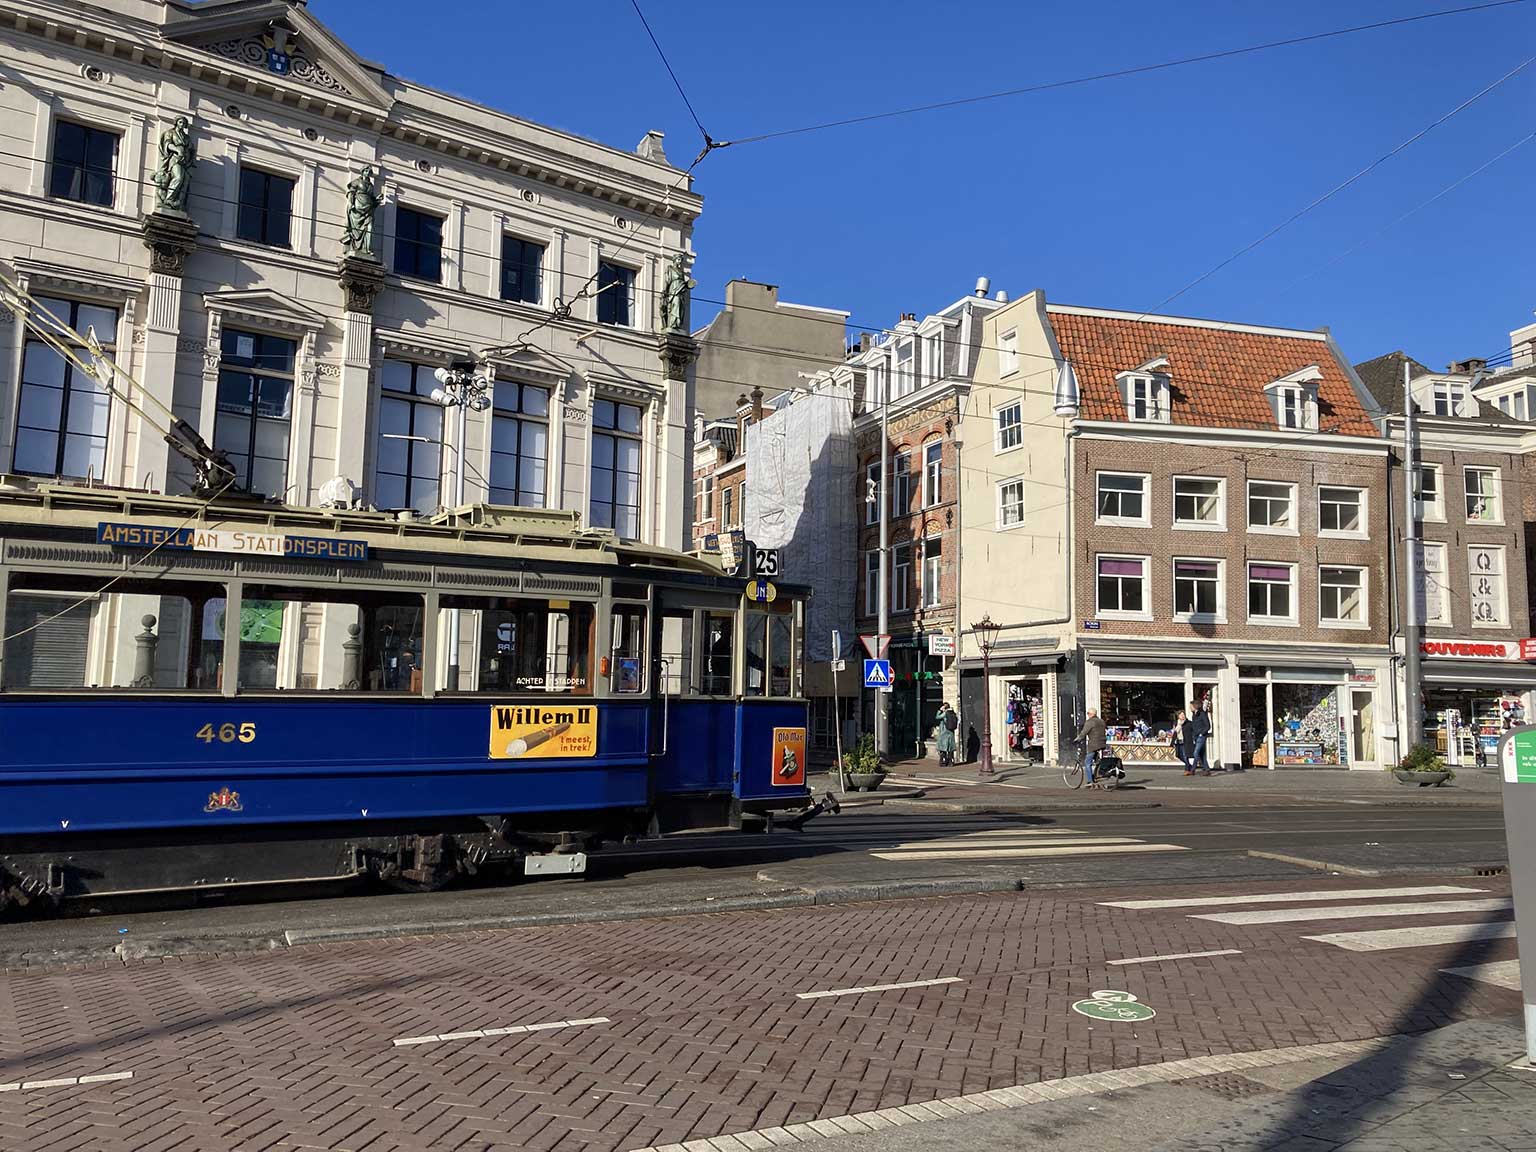 Historical blue tram in front of Arti et Amicitiae, Amsterdam. On the right the entrance to Spui and Rokin 108-110